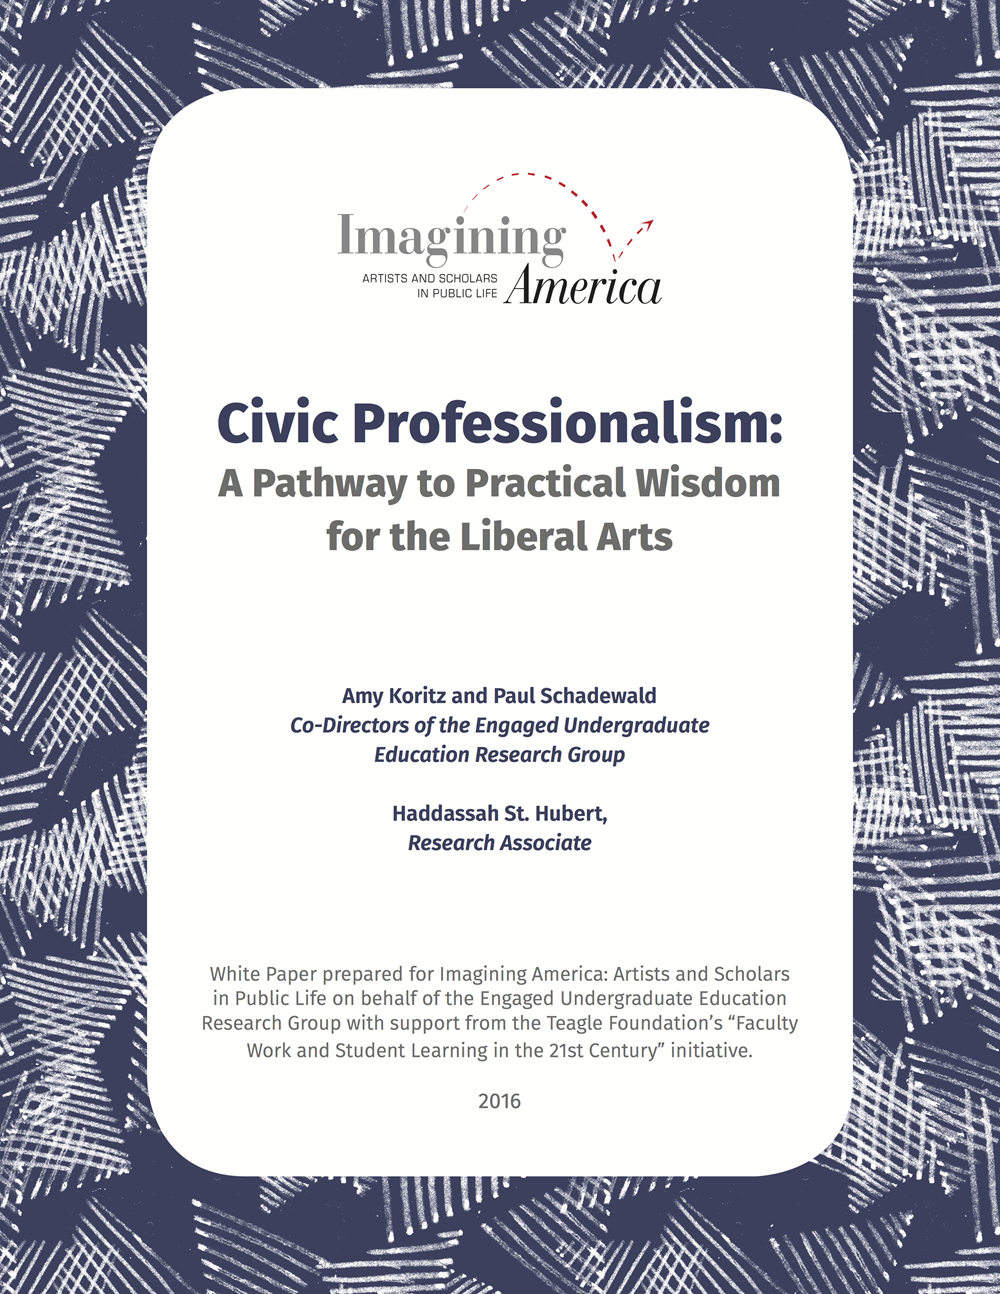 Civic Professionalism: A Pathway to Practical Wisdom for the Liberal Arts